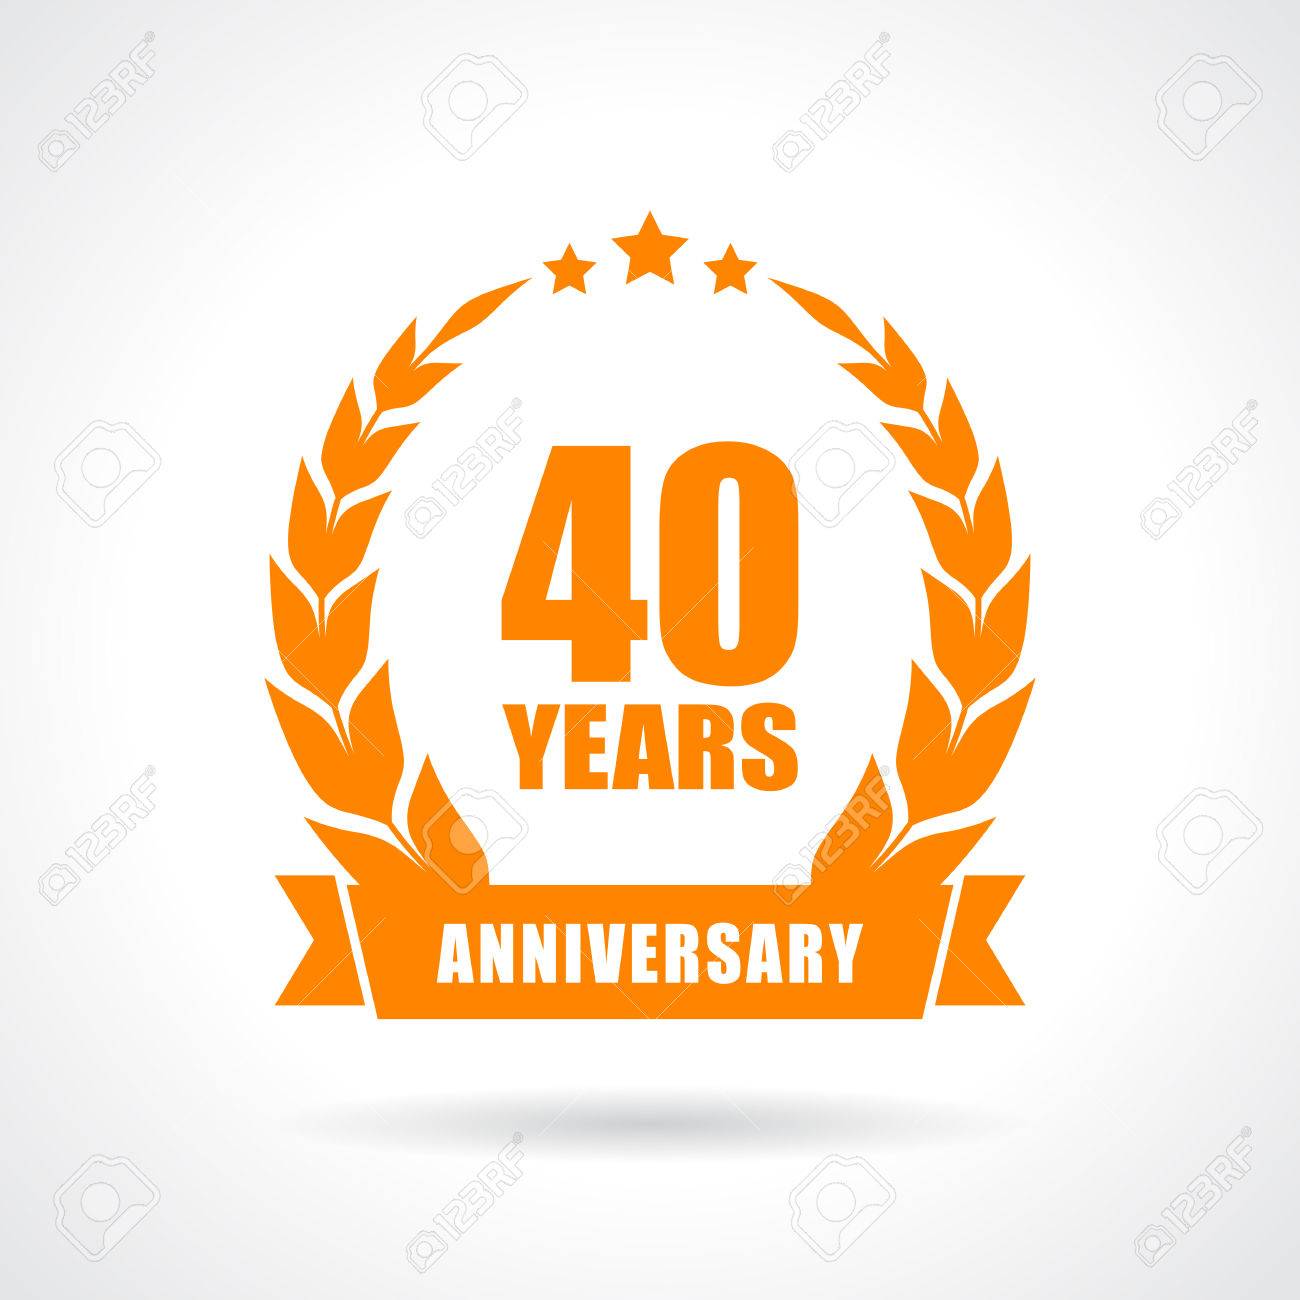 Anniversary icon, Anniversary Badge PNG and Vector for Free Download